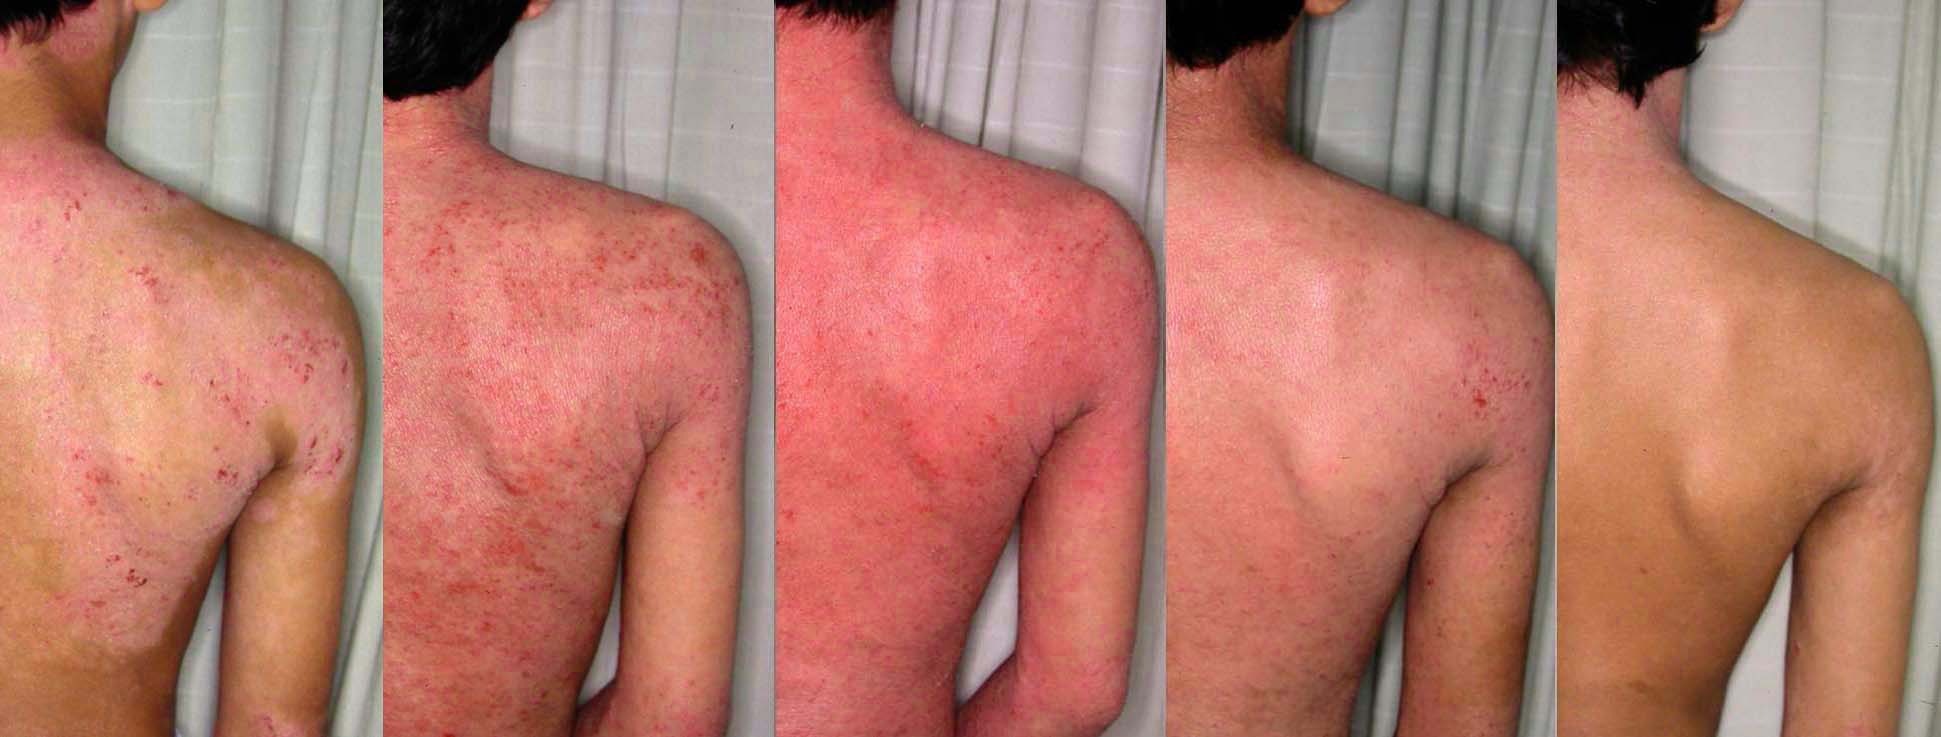 How To Deal With Eczema in Three Simple Ways